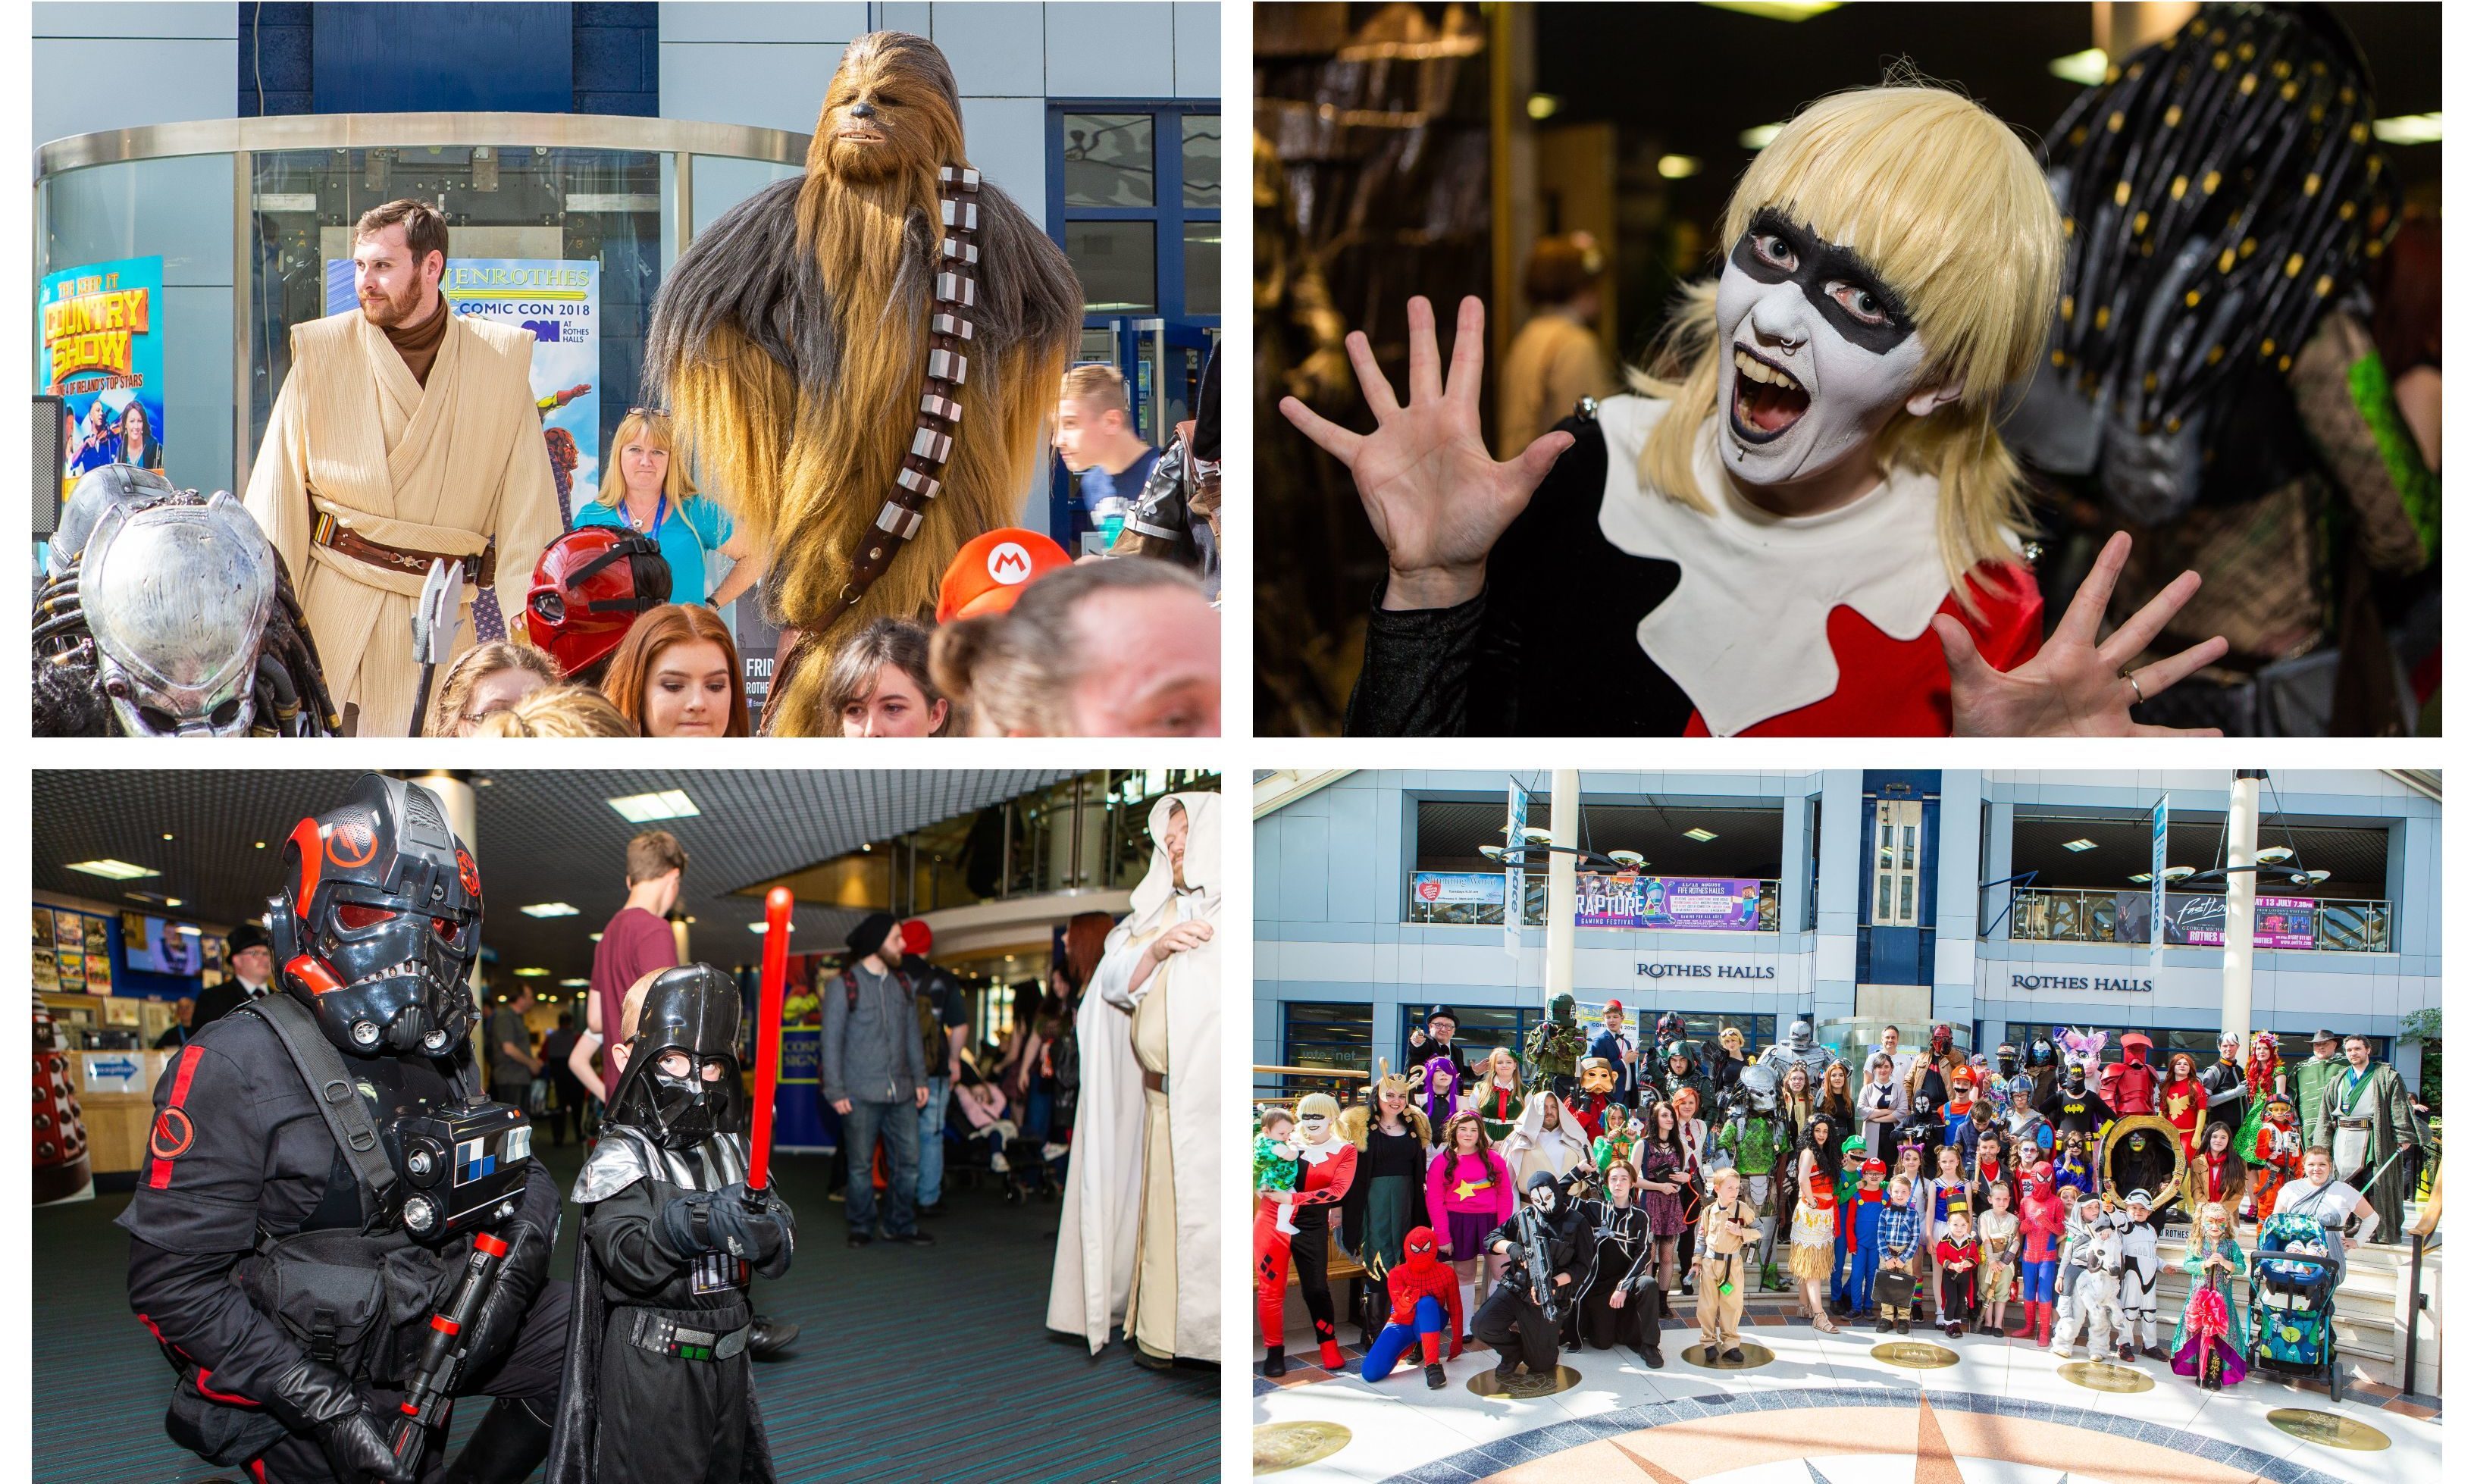 The 2018 Glenrothes Comic Con